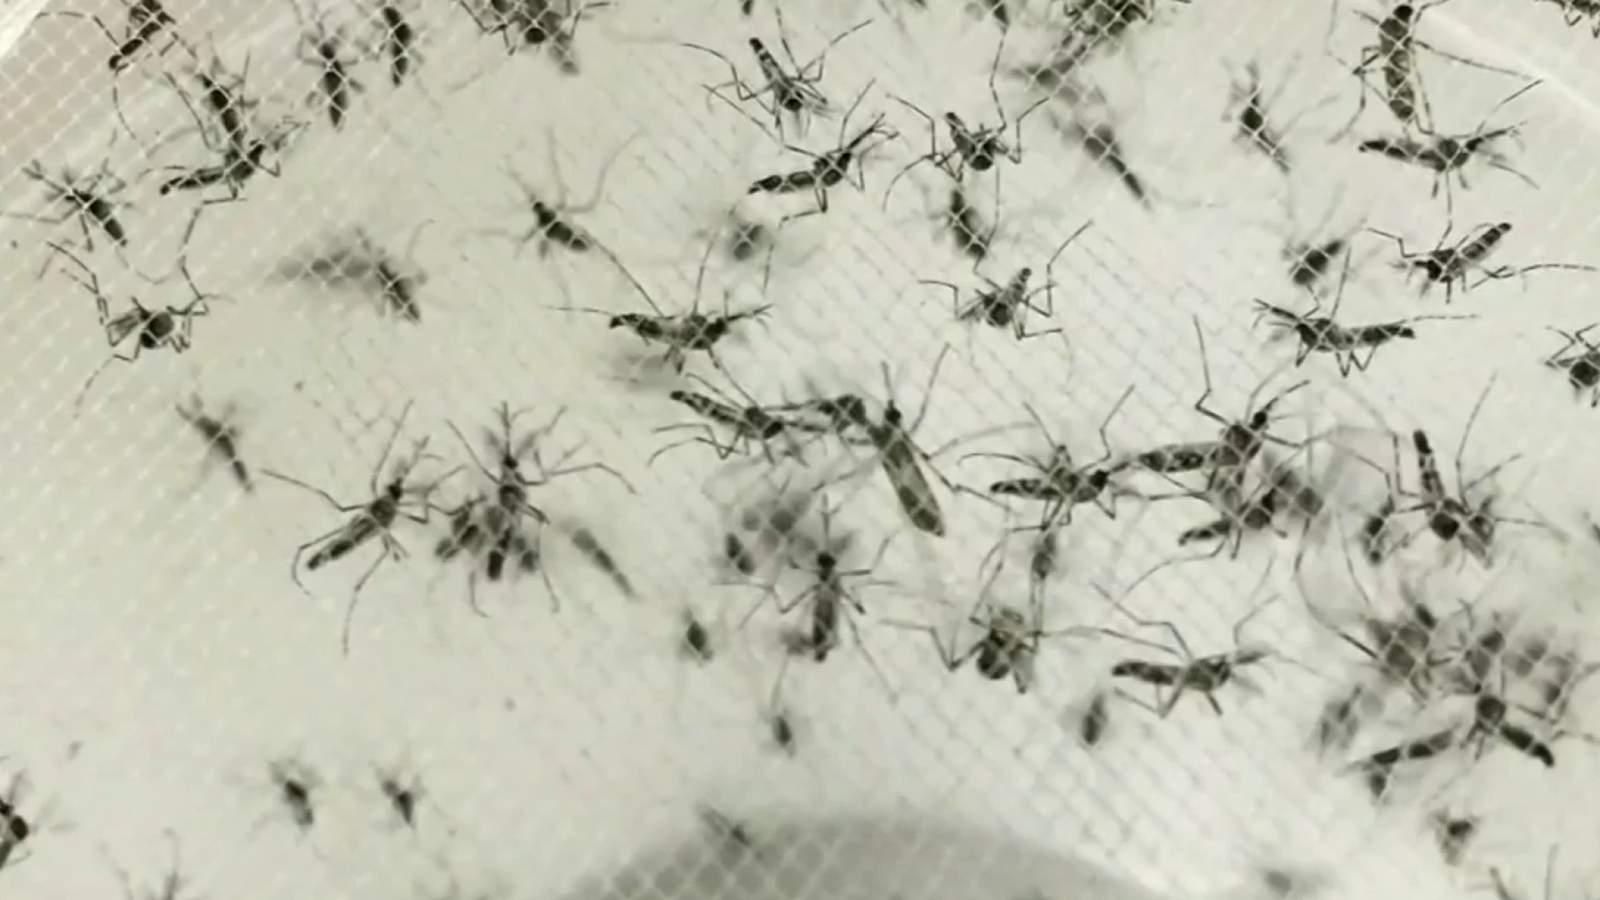 Health experts concerned about EEE, West Nile Virus in Michigan